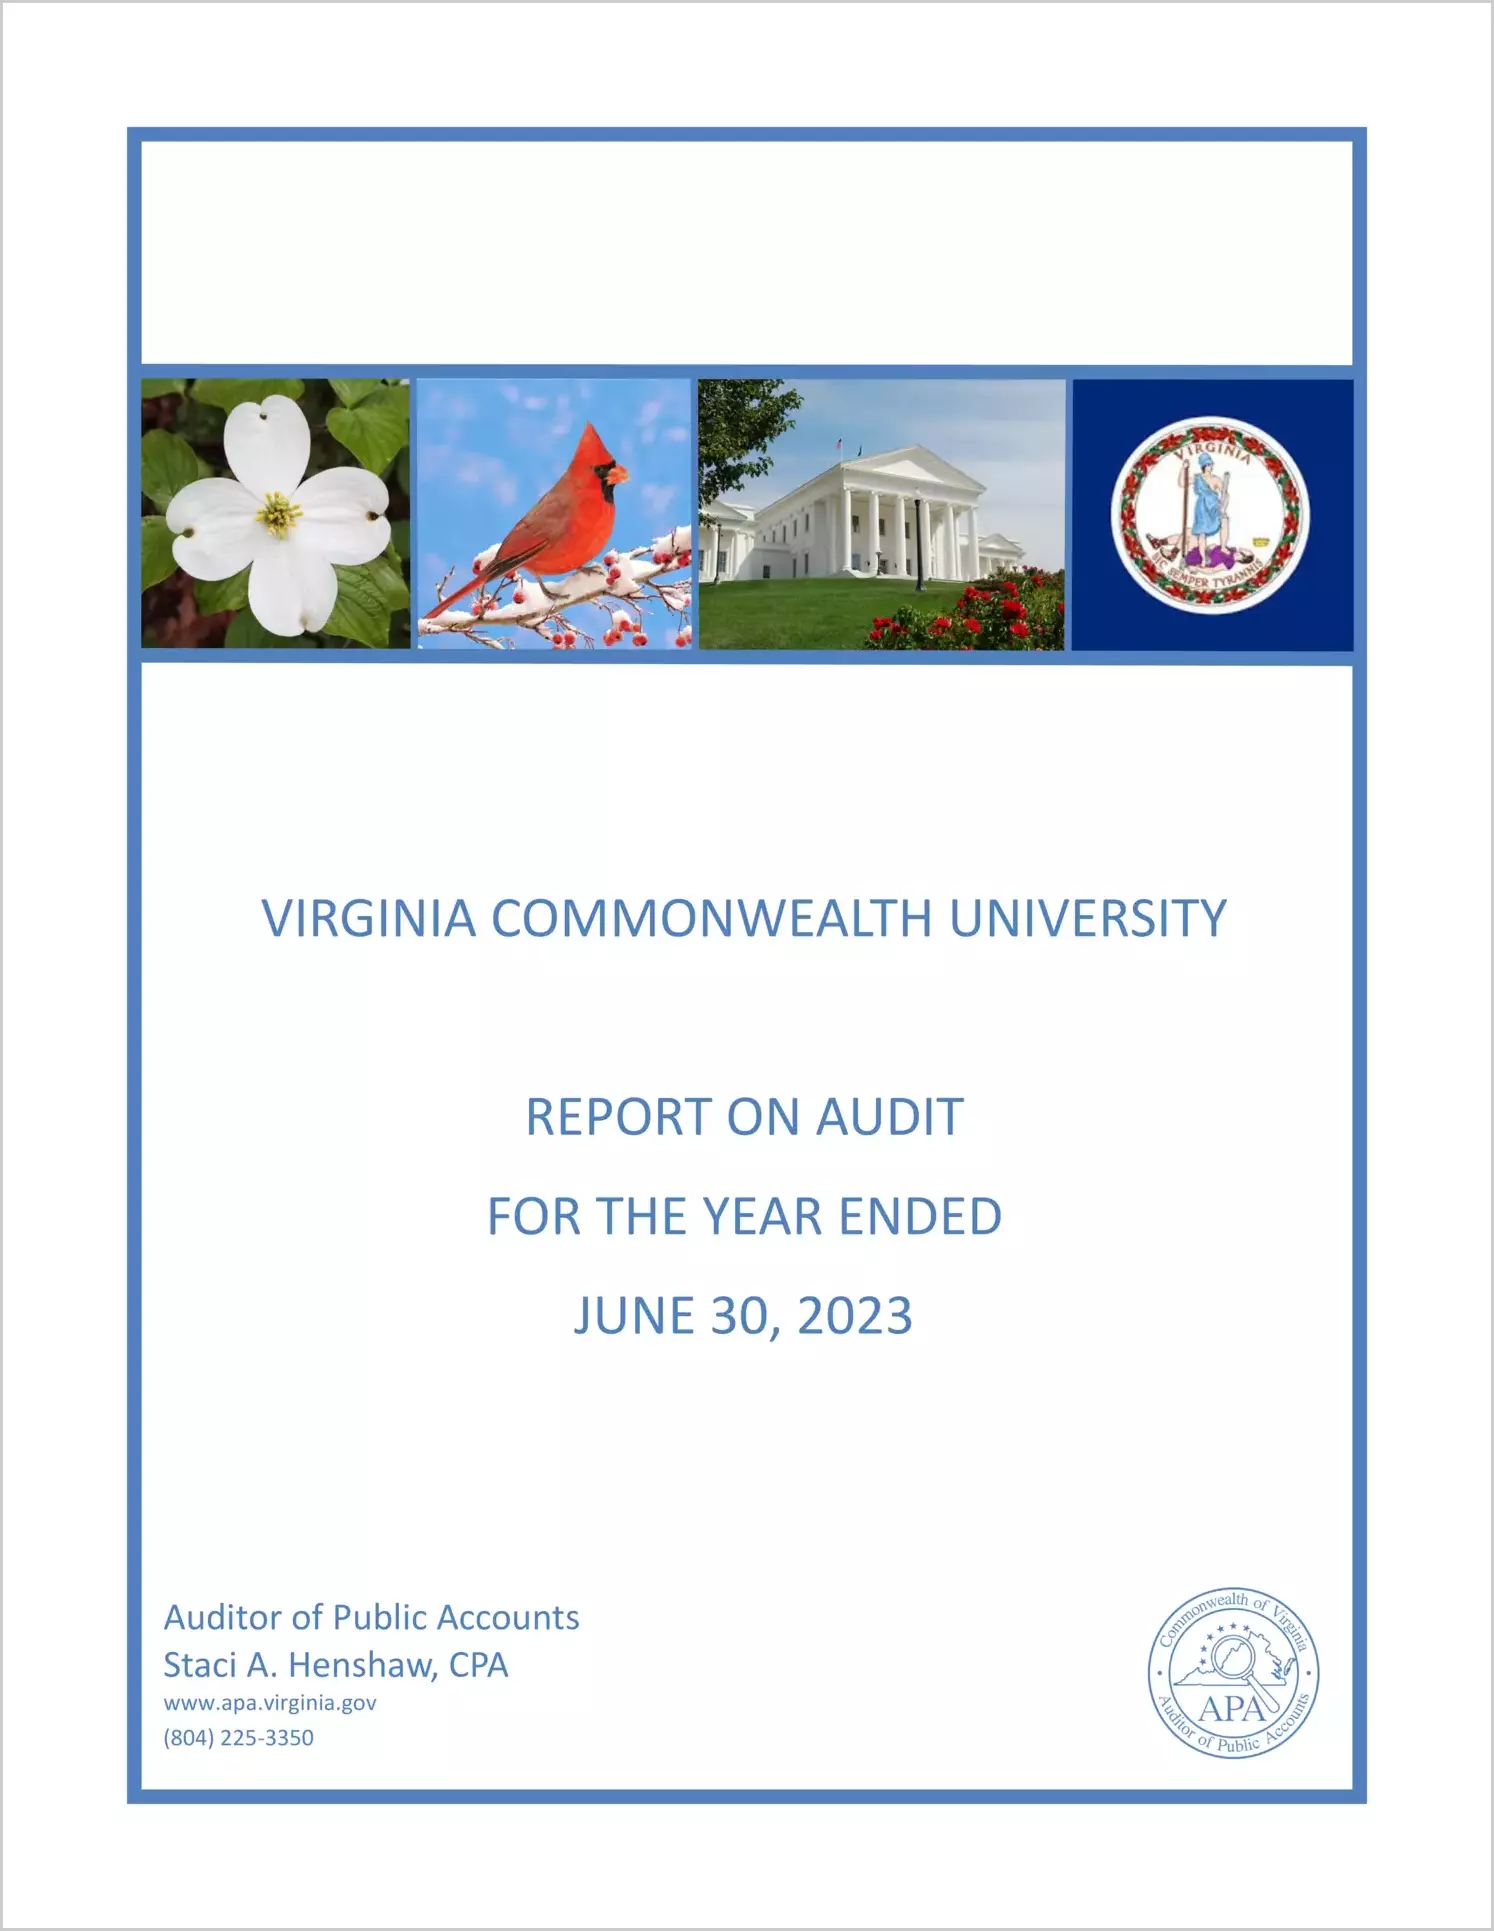 Virginia Commonwealth University for the year ended June 30, 2023